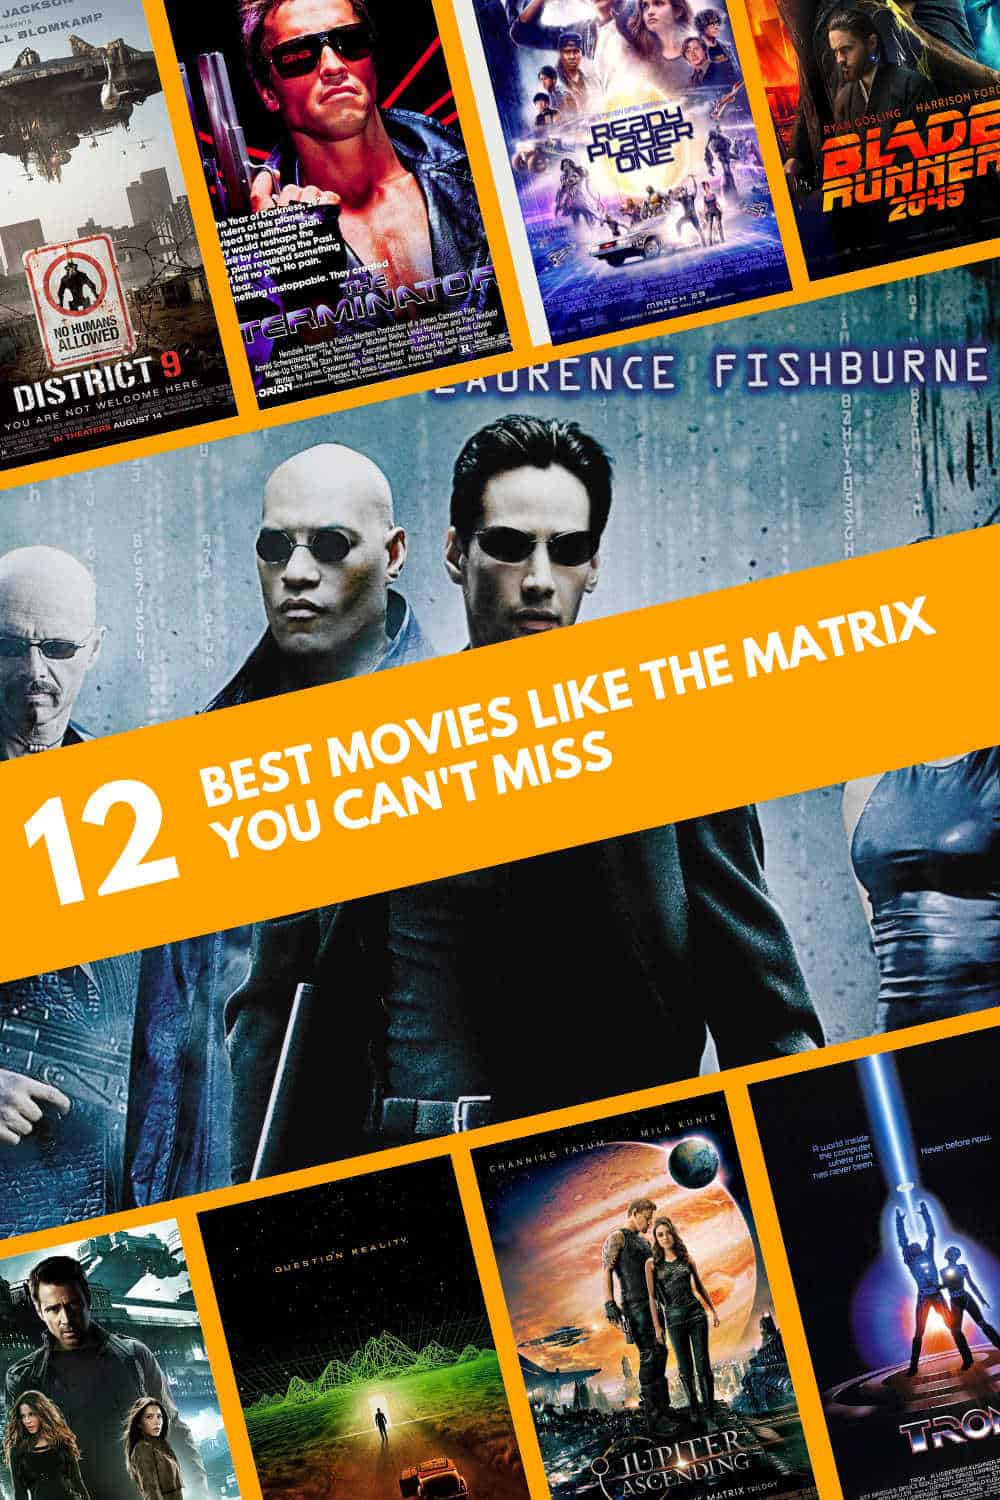 Movie Like The Matrix You Can't Miss